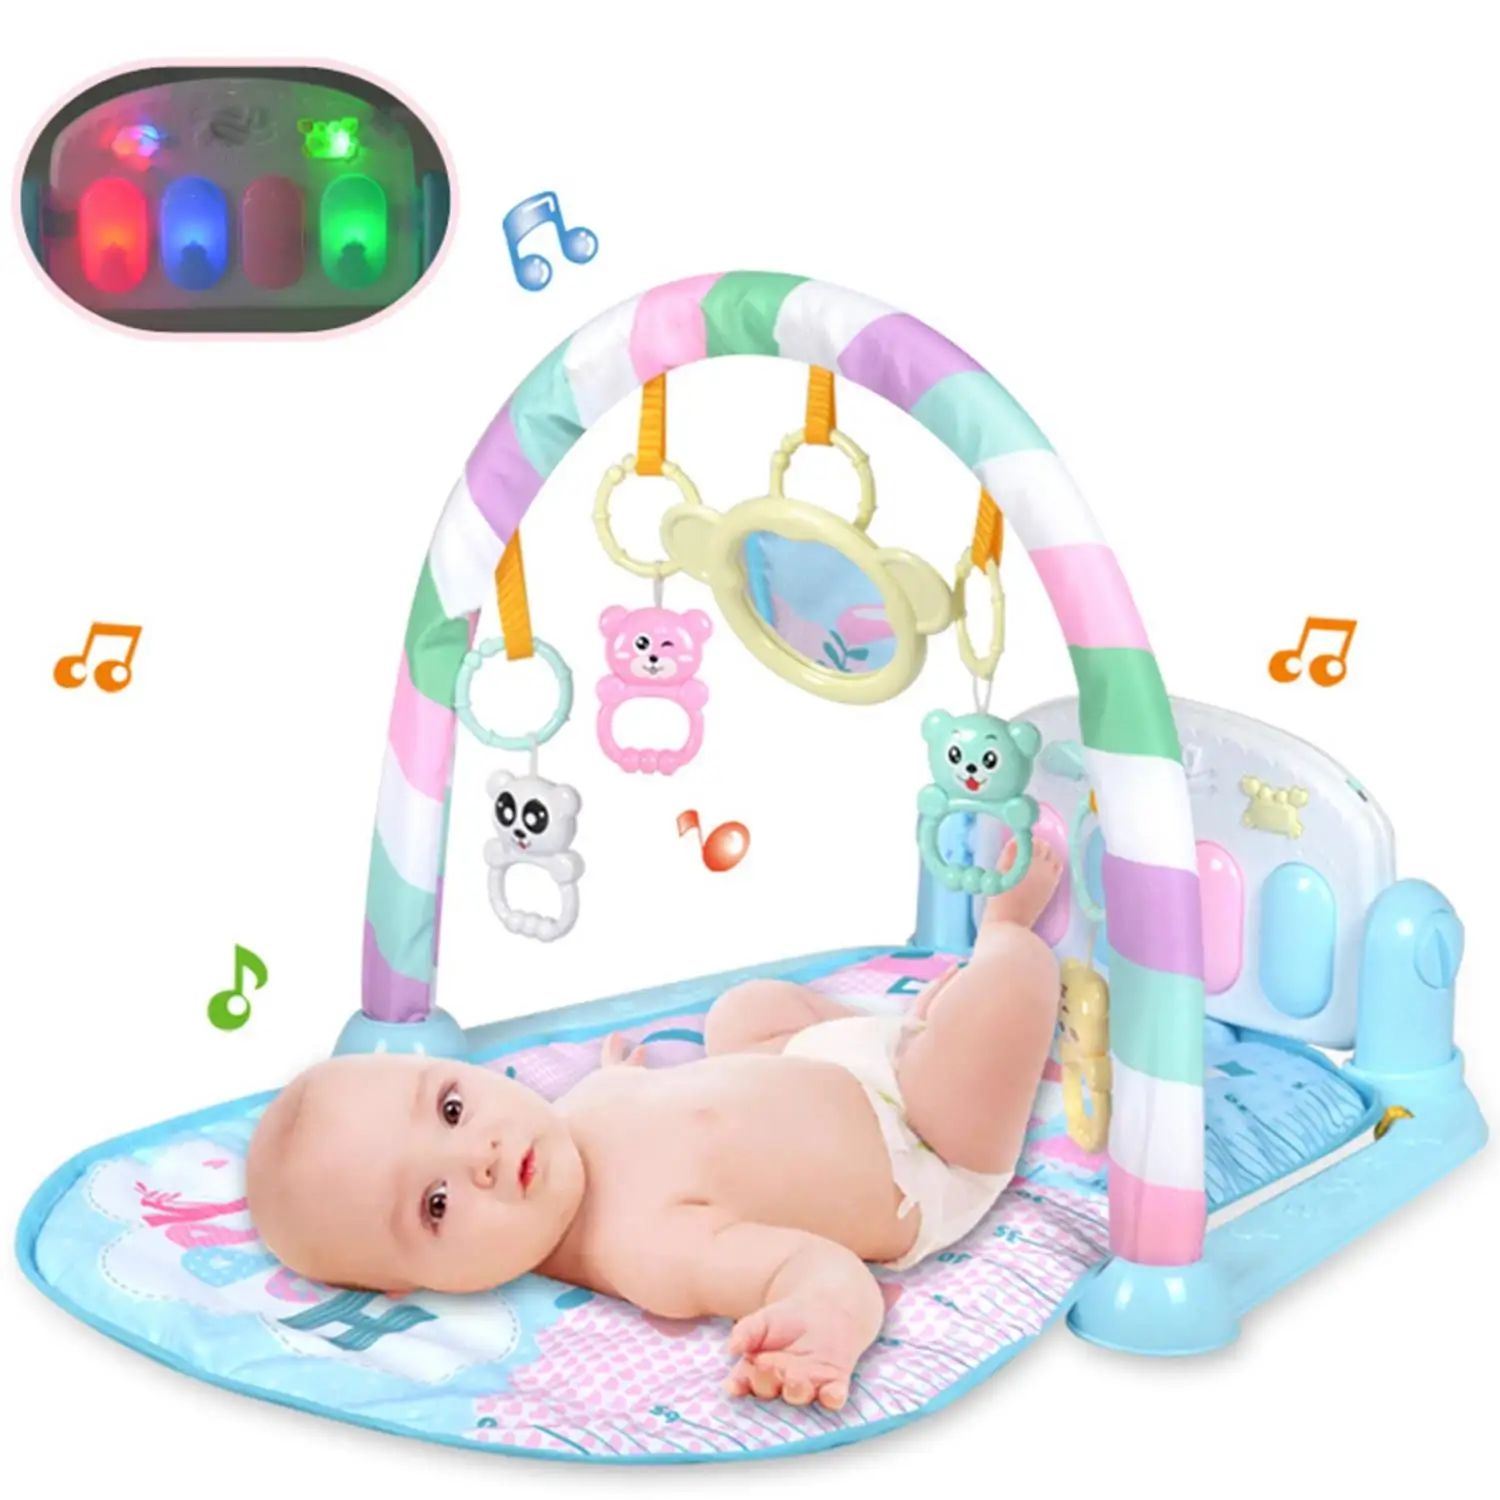 Baby Activity Gym Children's Play Mat 0-12 Months Developing Carpet Soft Rattles Musical Toys Activity Rug For Todder Baby Games